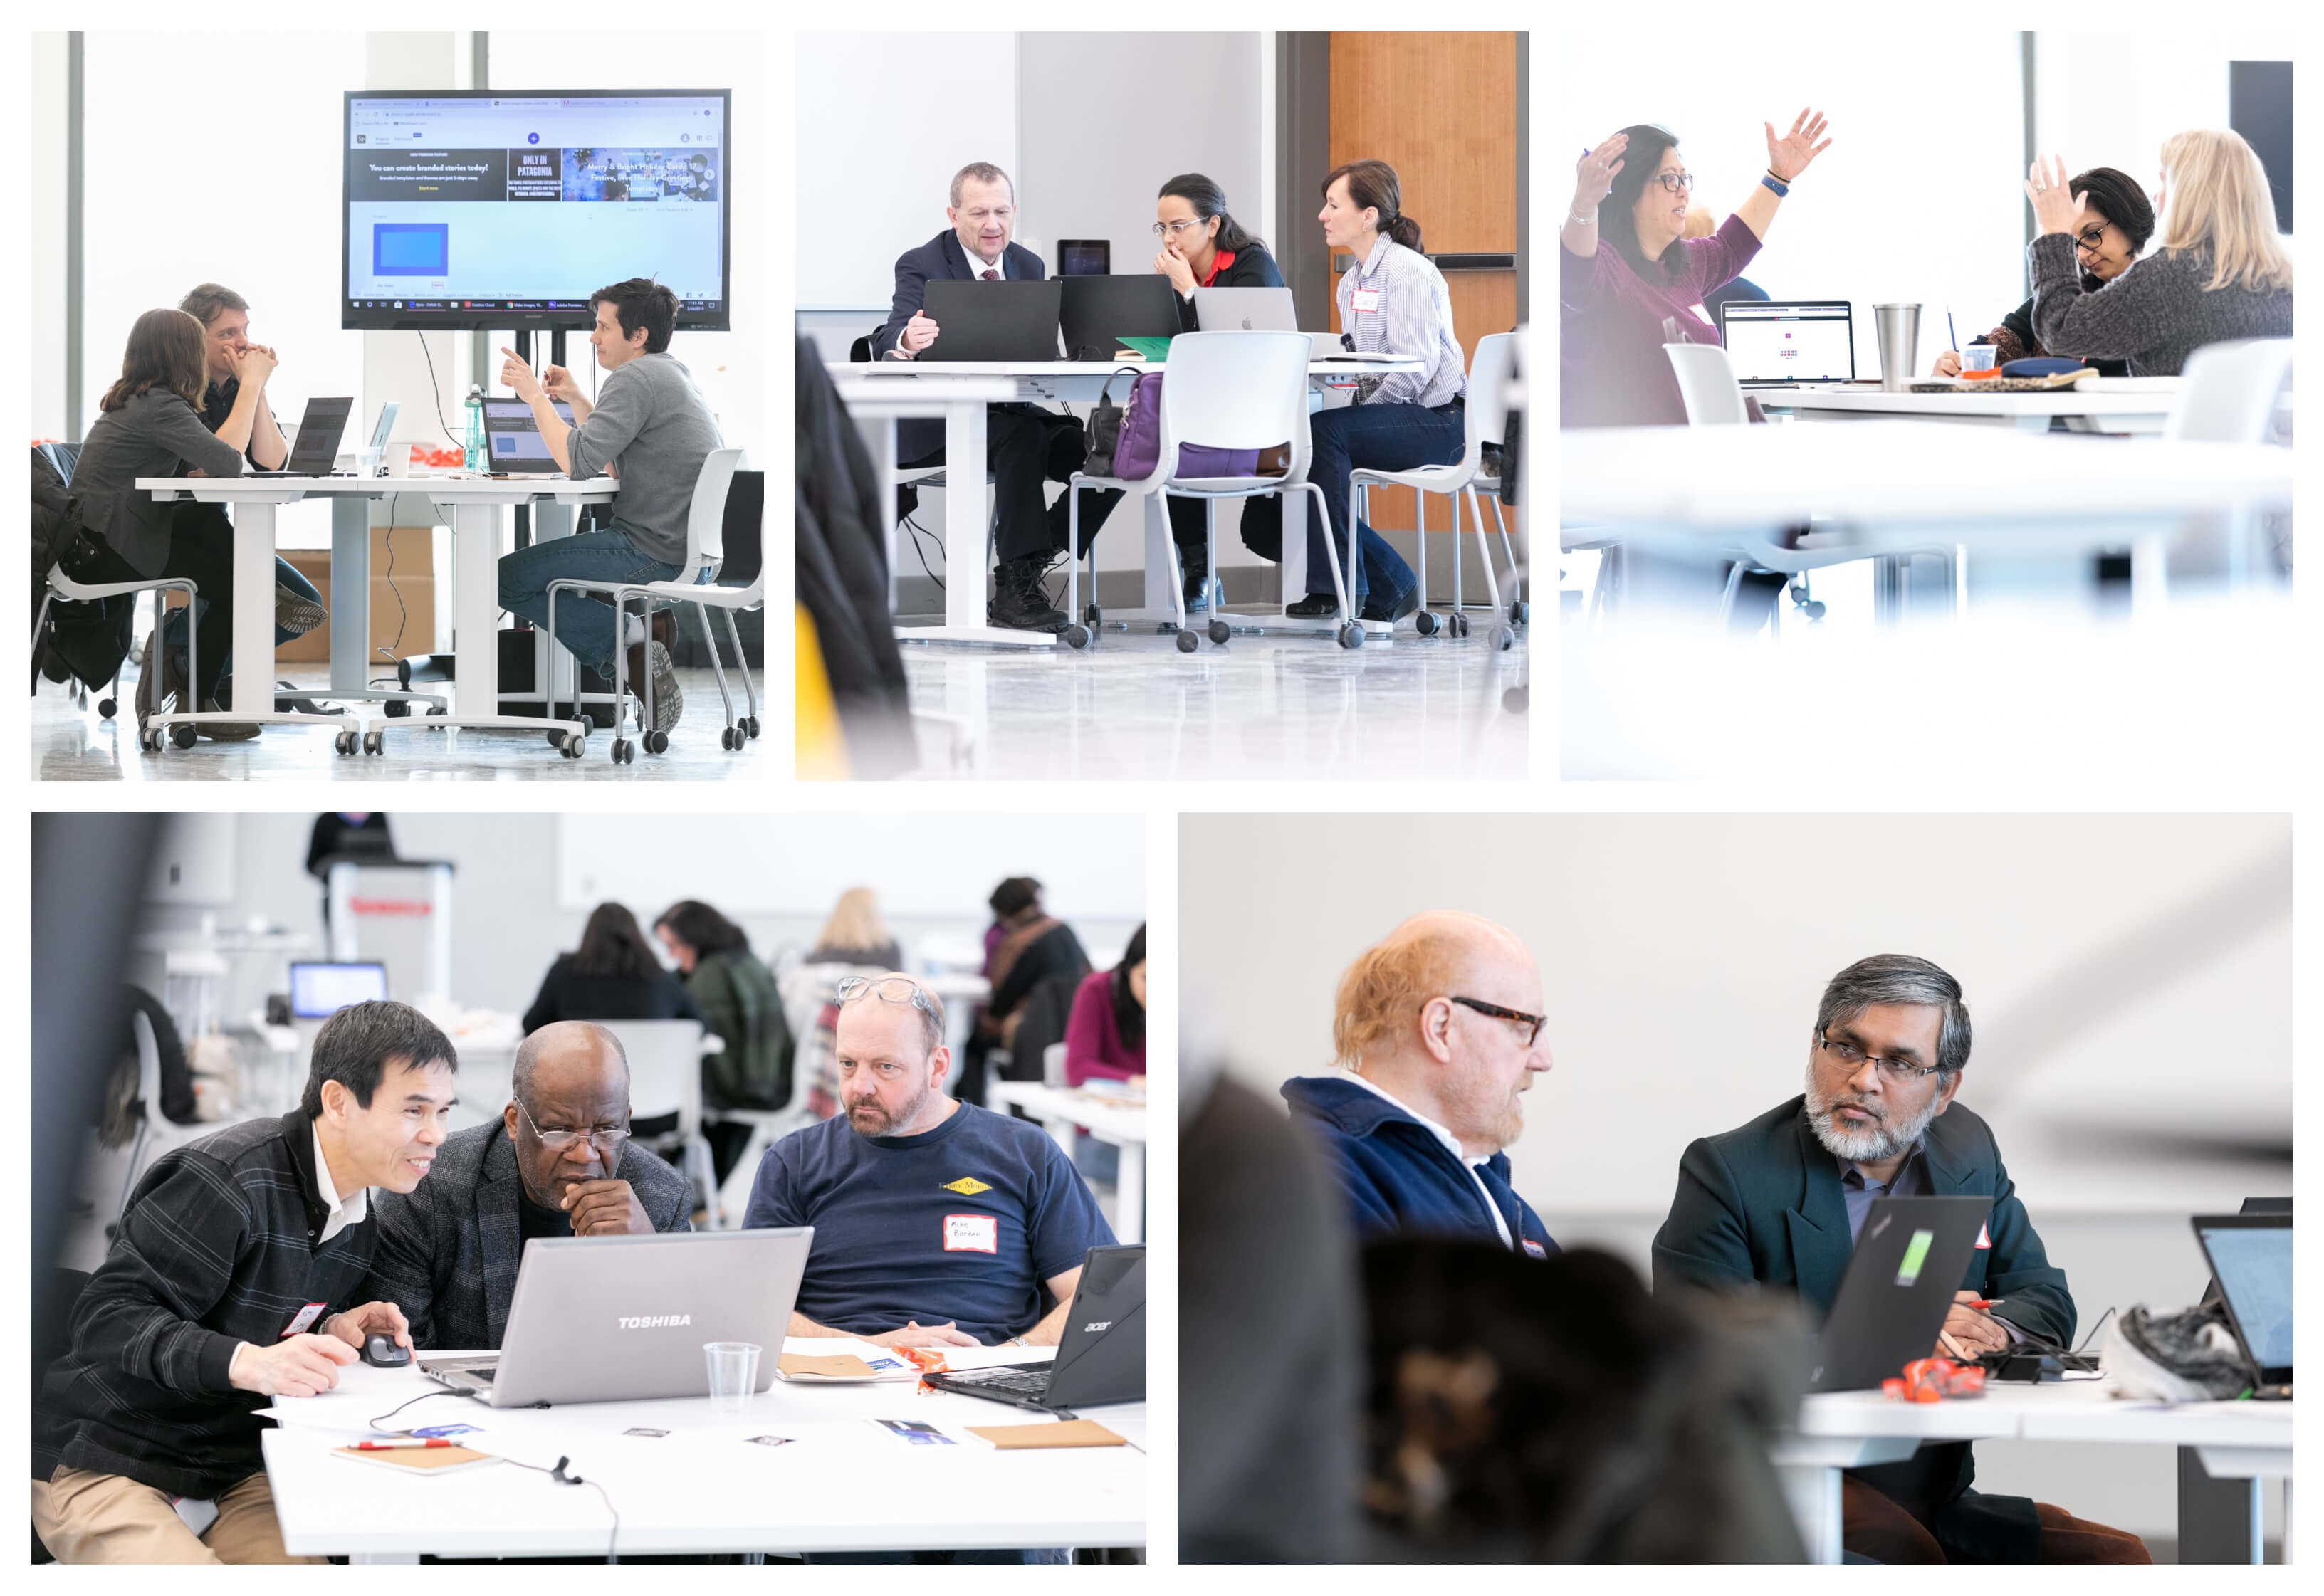 A collage of images from the Adobe Creative Jam for employees